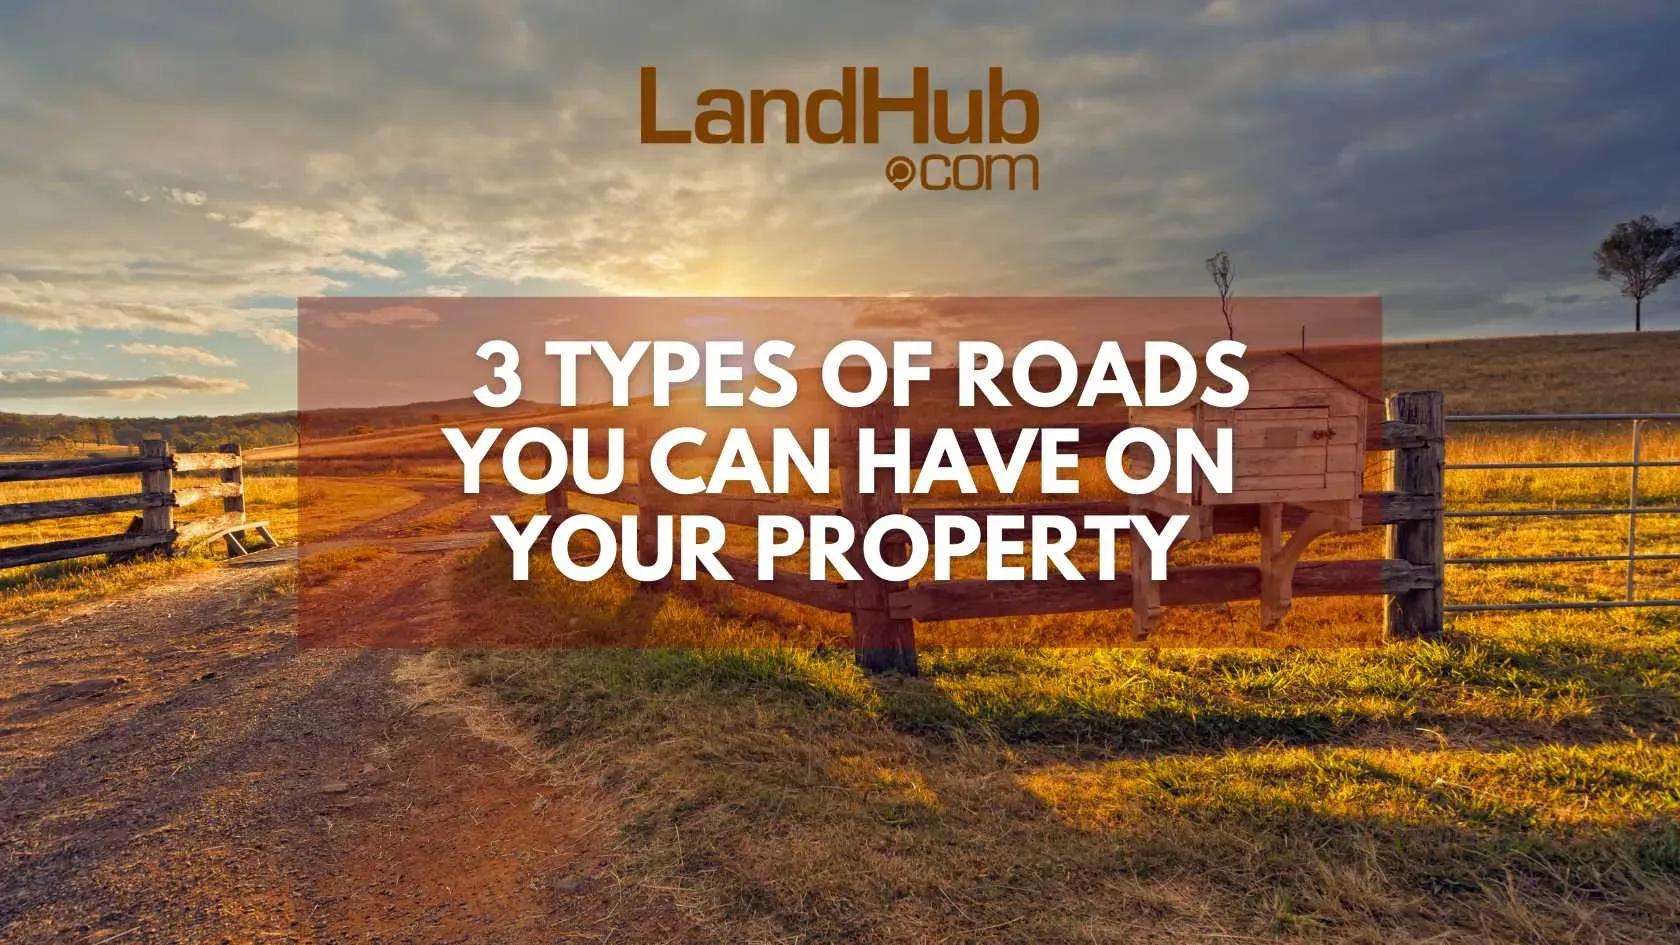   3 types of roads you can have on your property